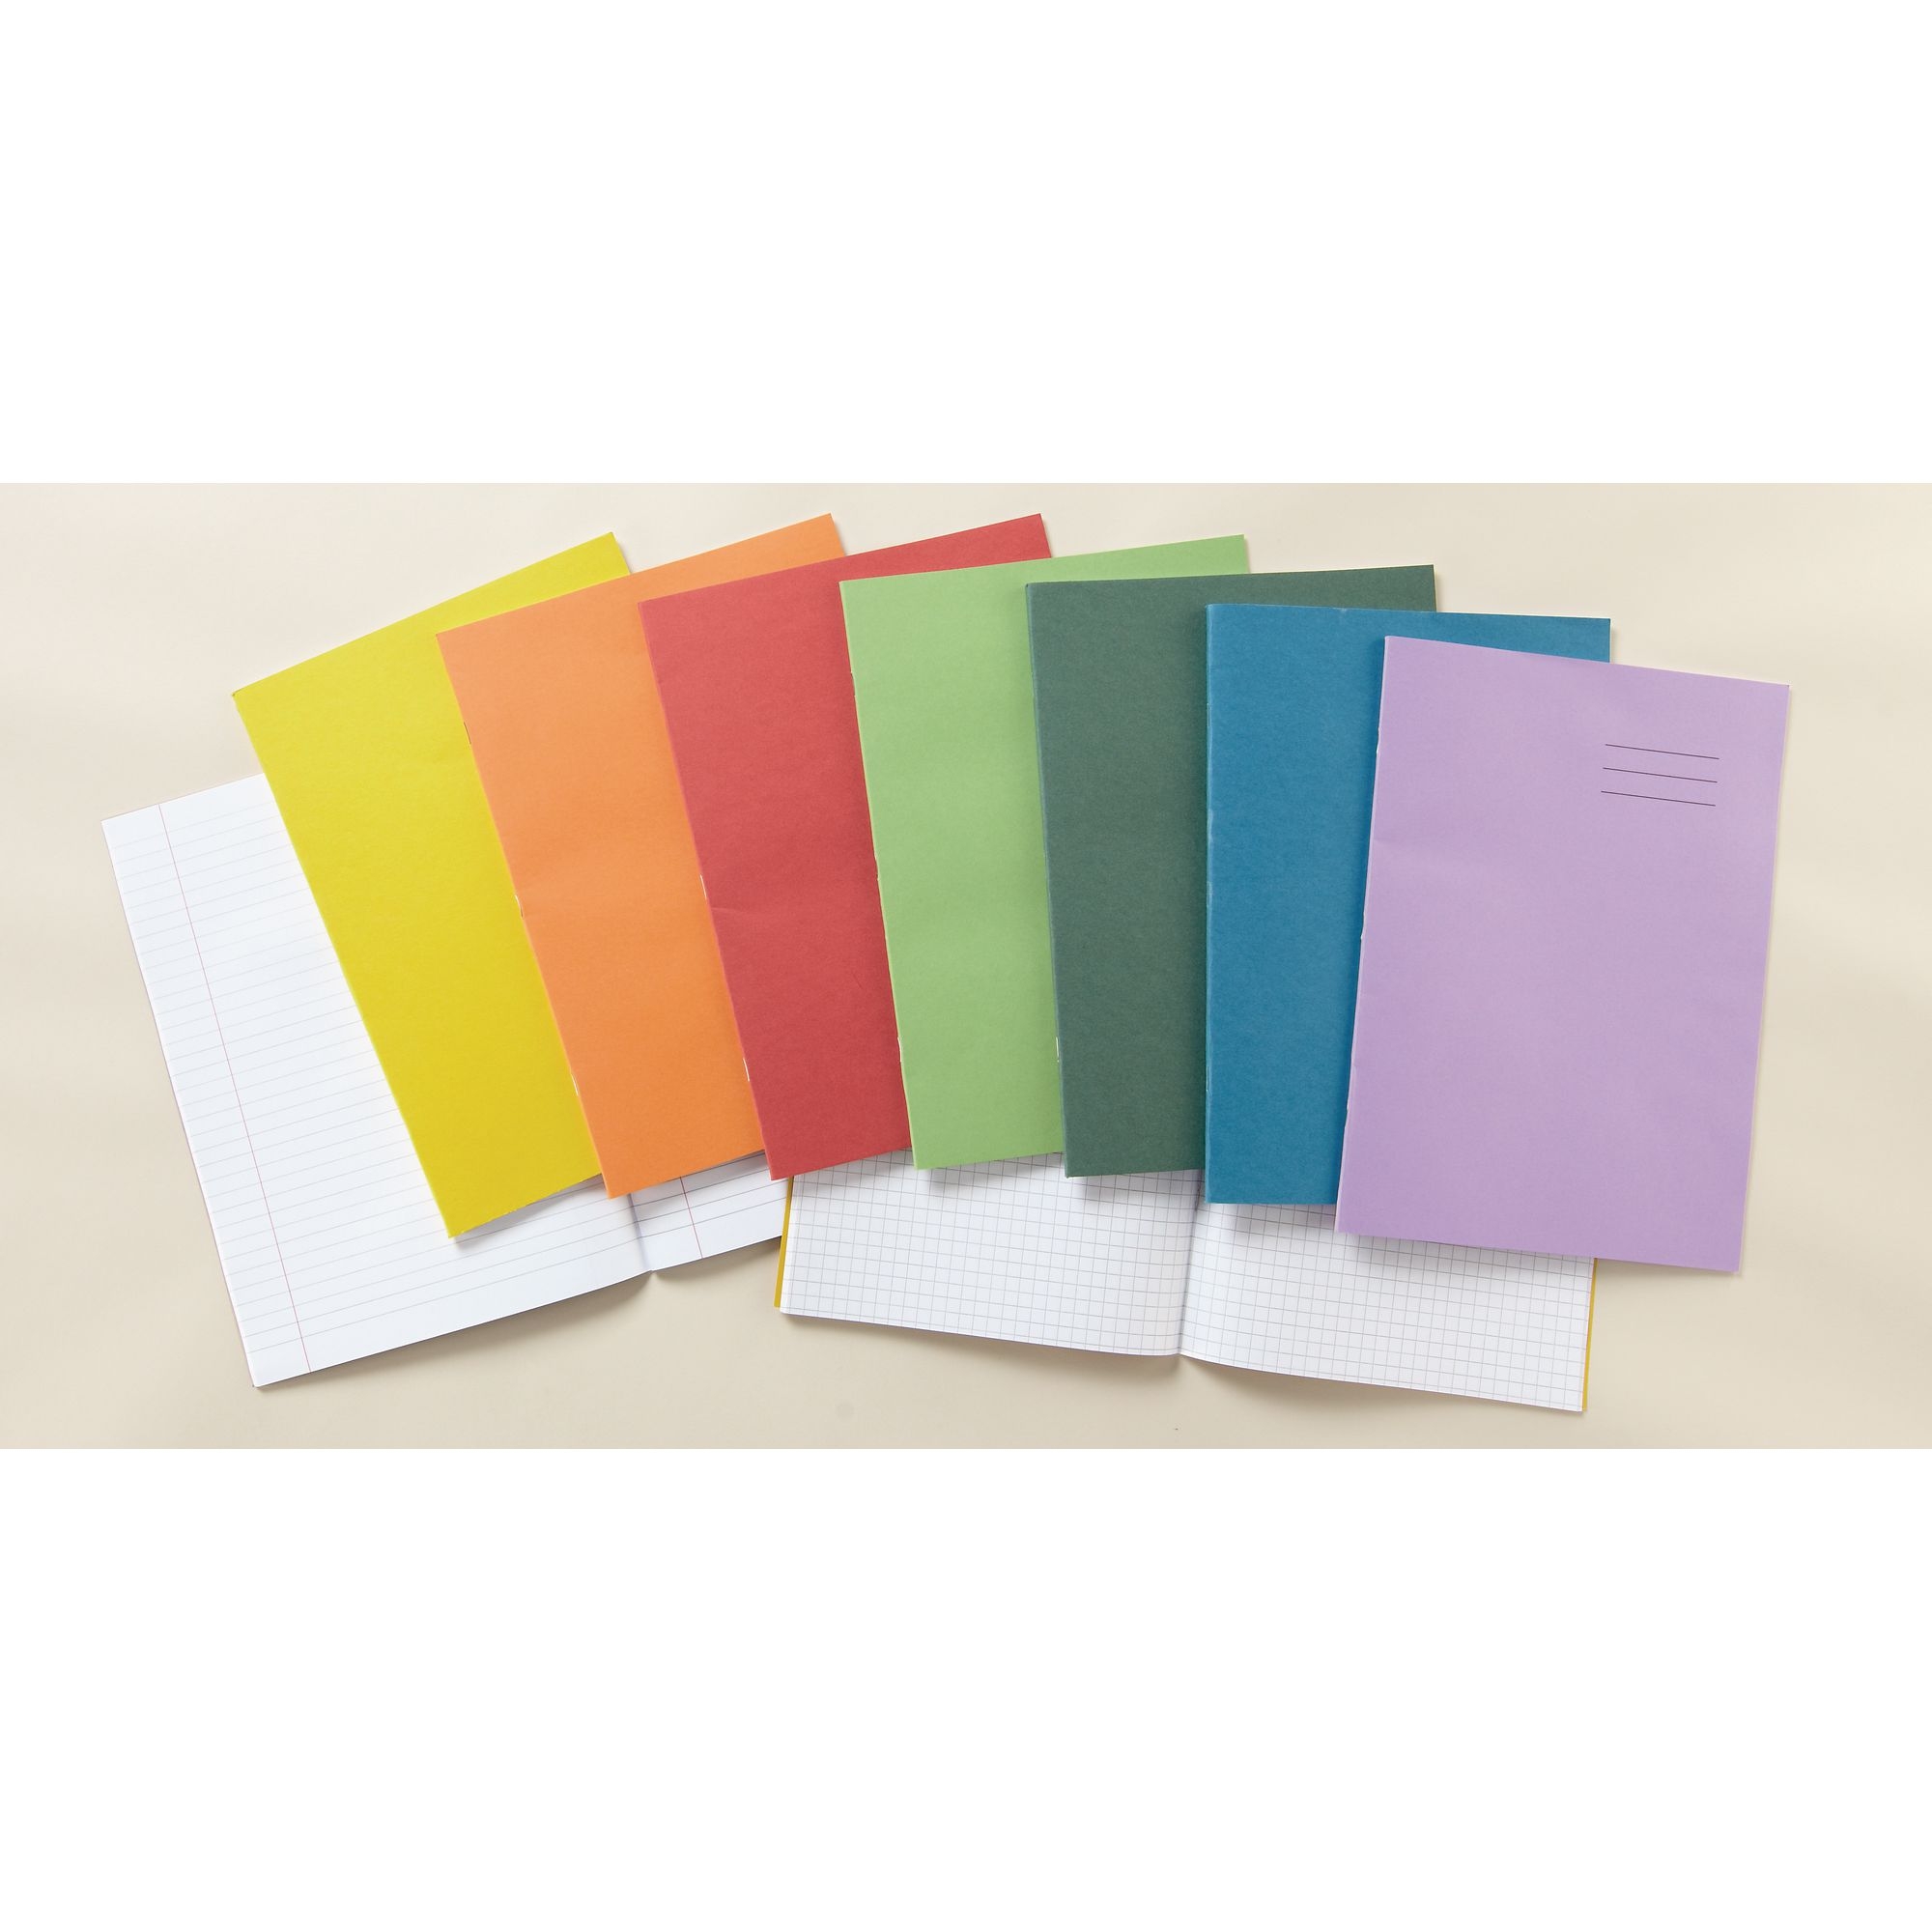 Classmates Light Green A4 Exercise Book 32-Page, 8mm Ruled With Margin - Pack of 100